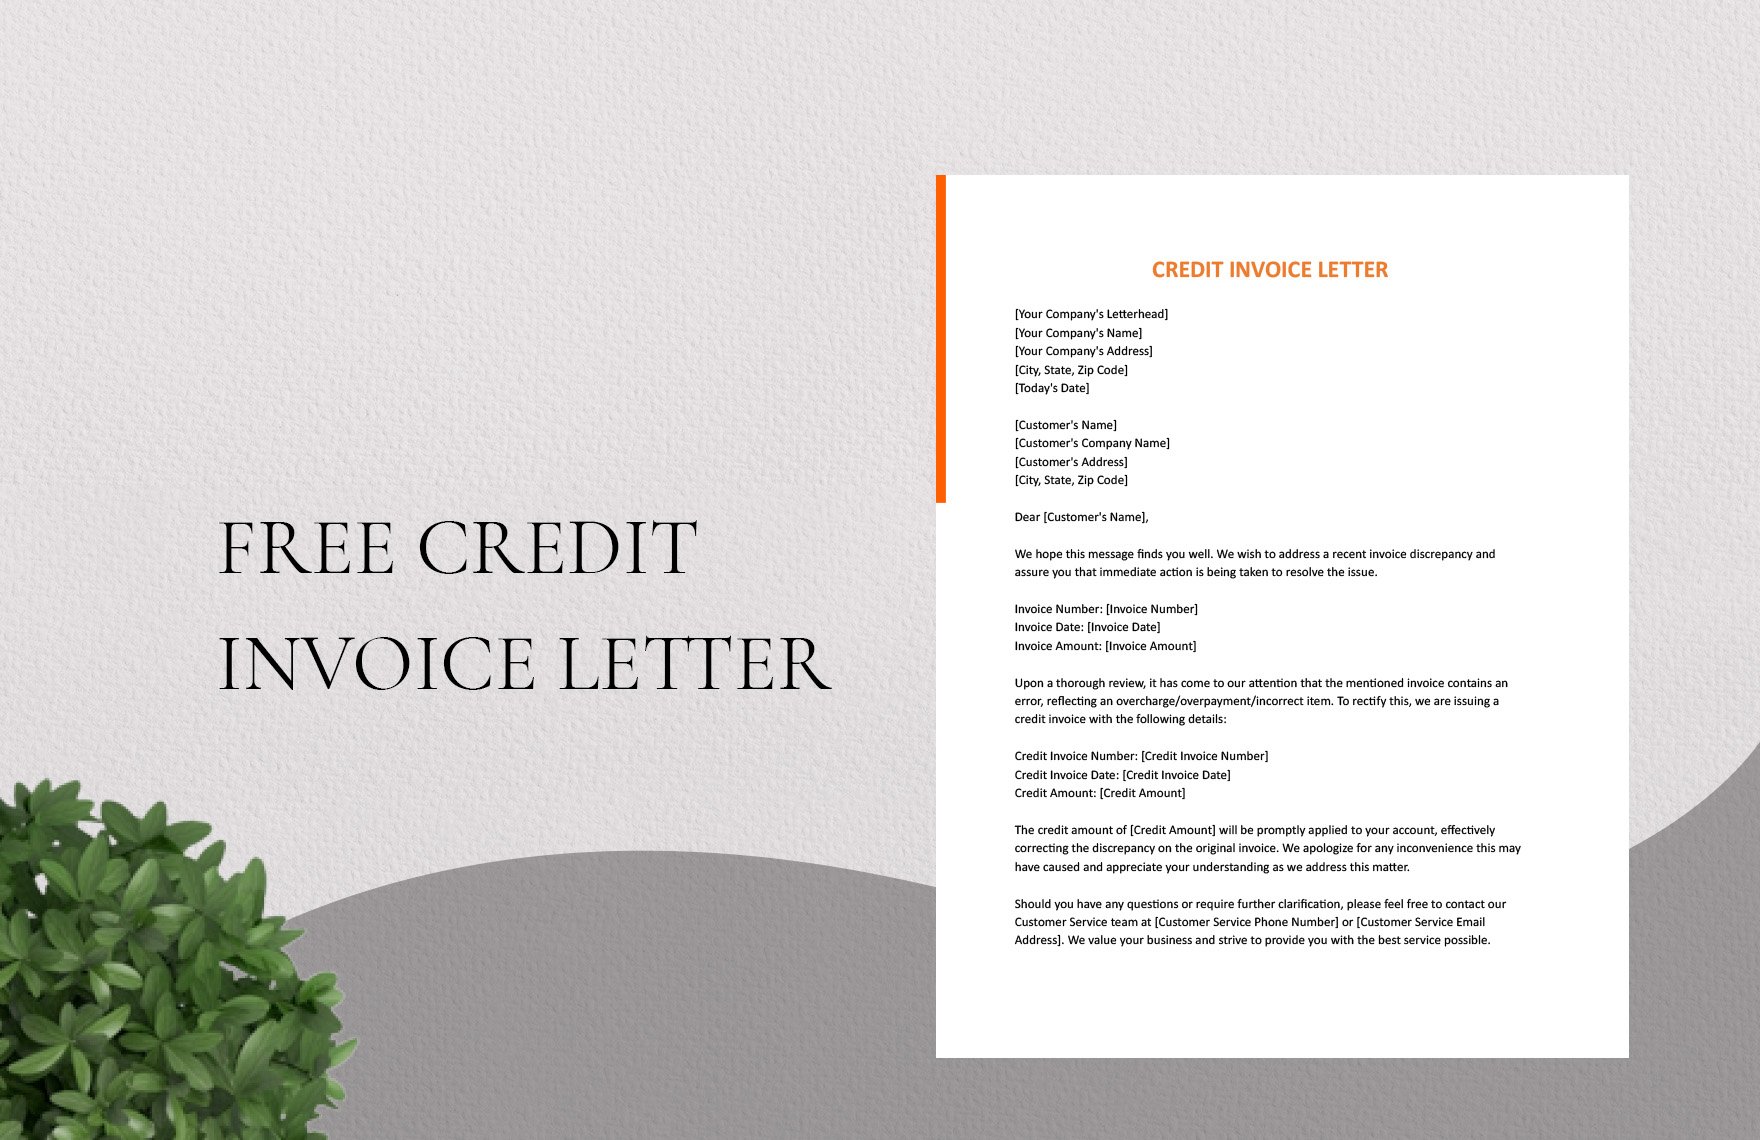 Credit Invoice Letter in Word, Google Docs